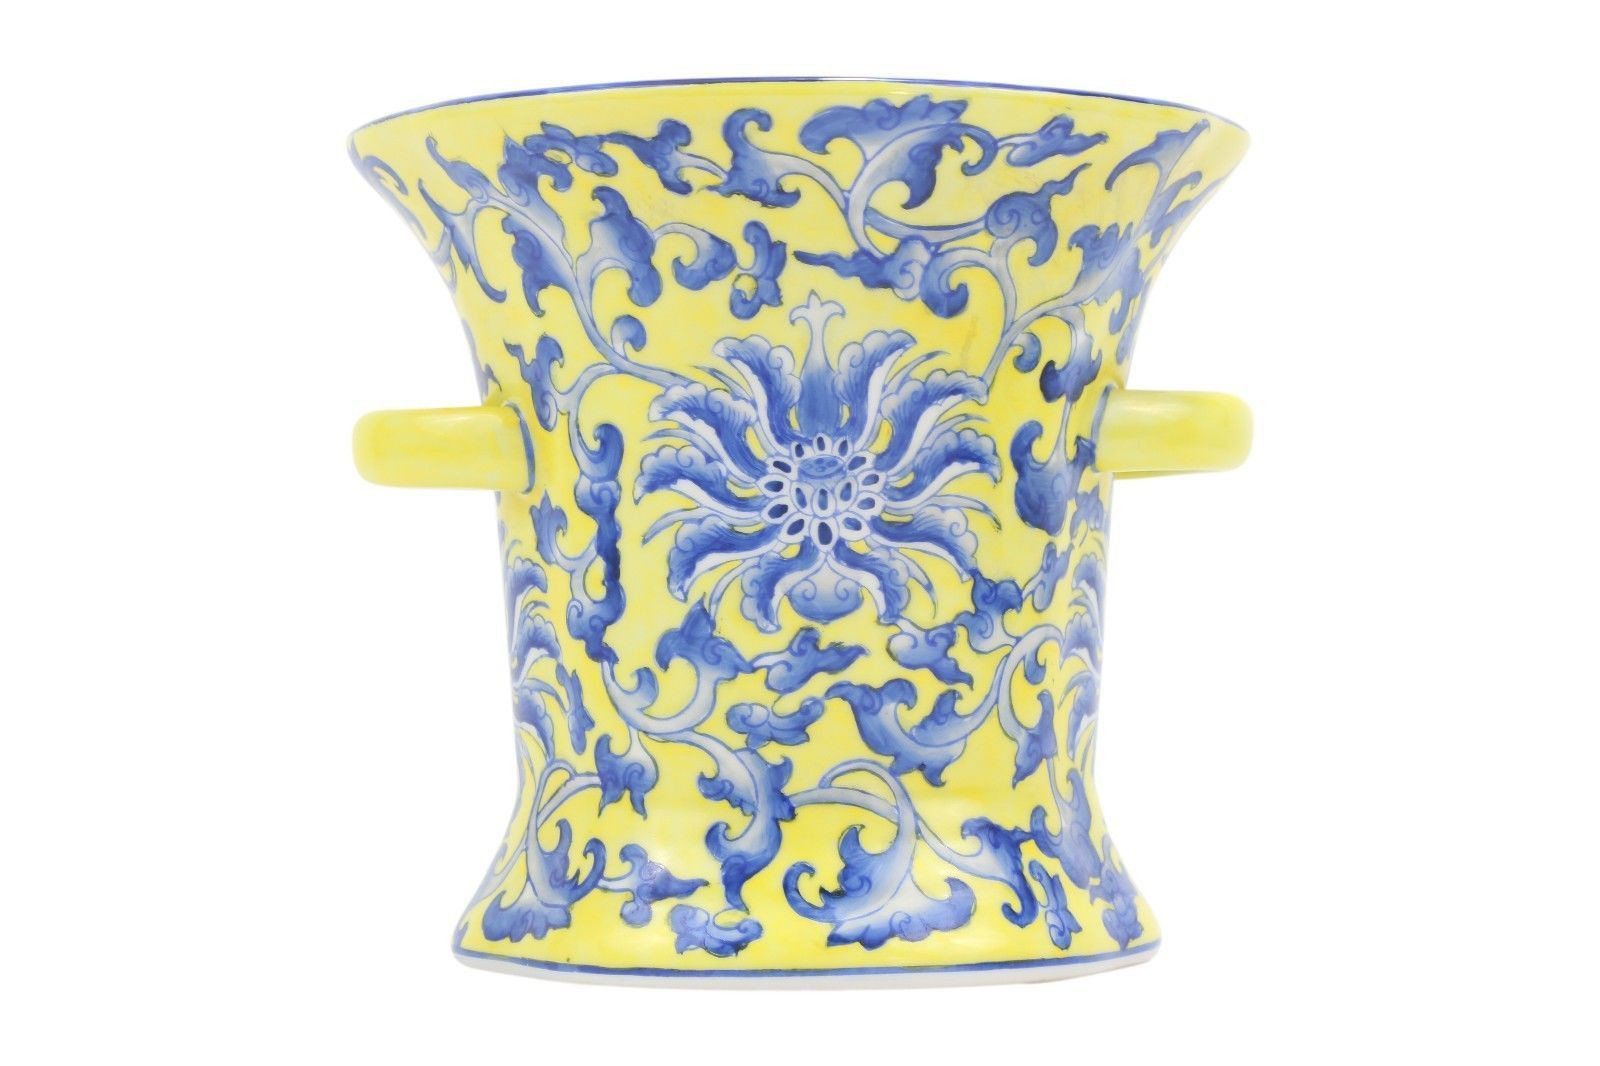 29 Elegant Limoges China Vase 2024 free download limoges china vase of beautiful yellow and blue floral pattern ring cup porcelain vase 7 with regard to beautiful yellow and blue floral pattern ring cup porcelain vase 7 products